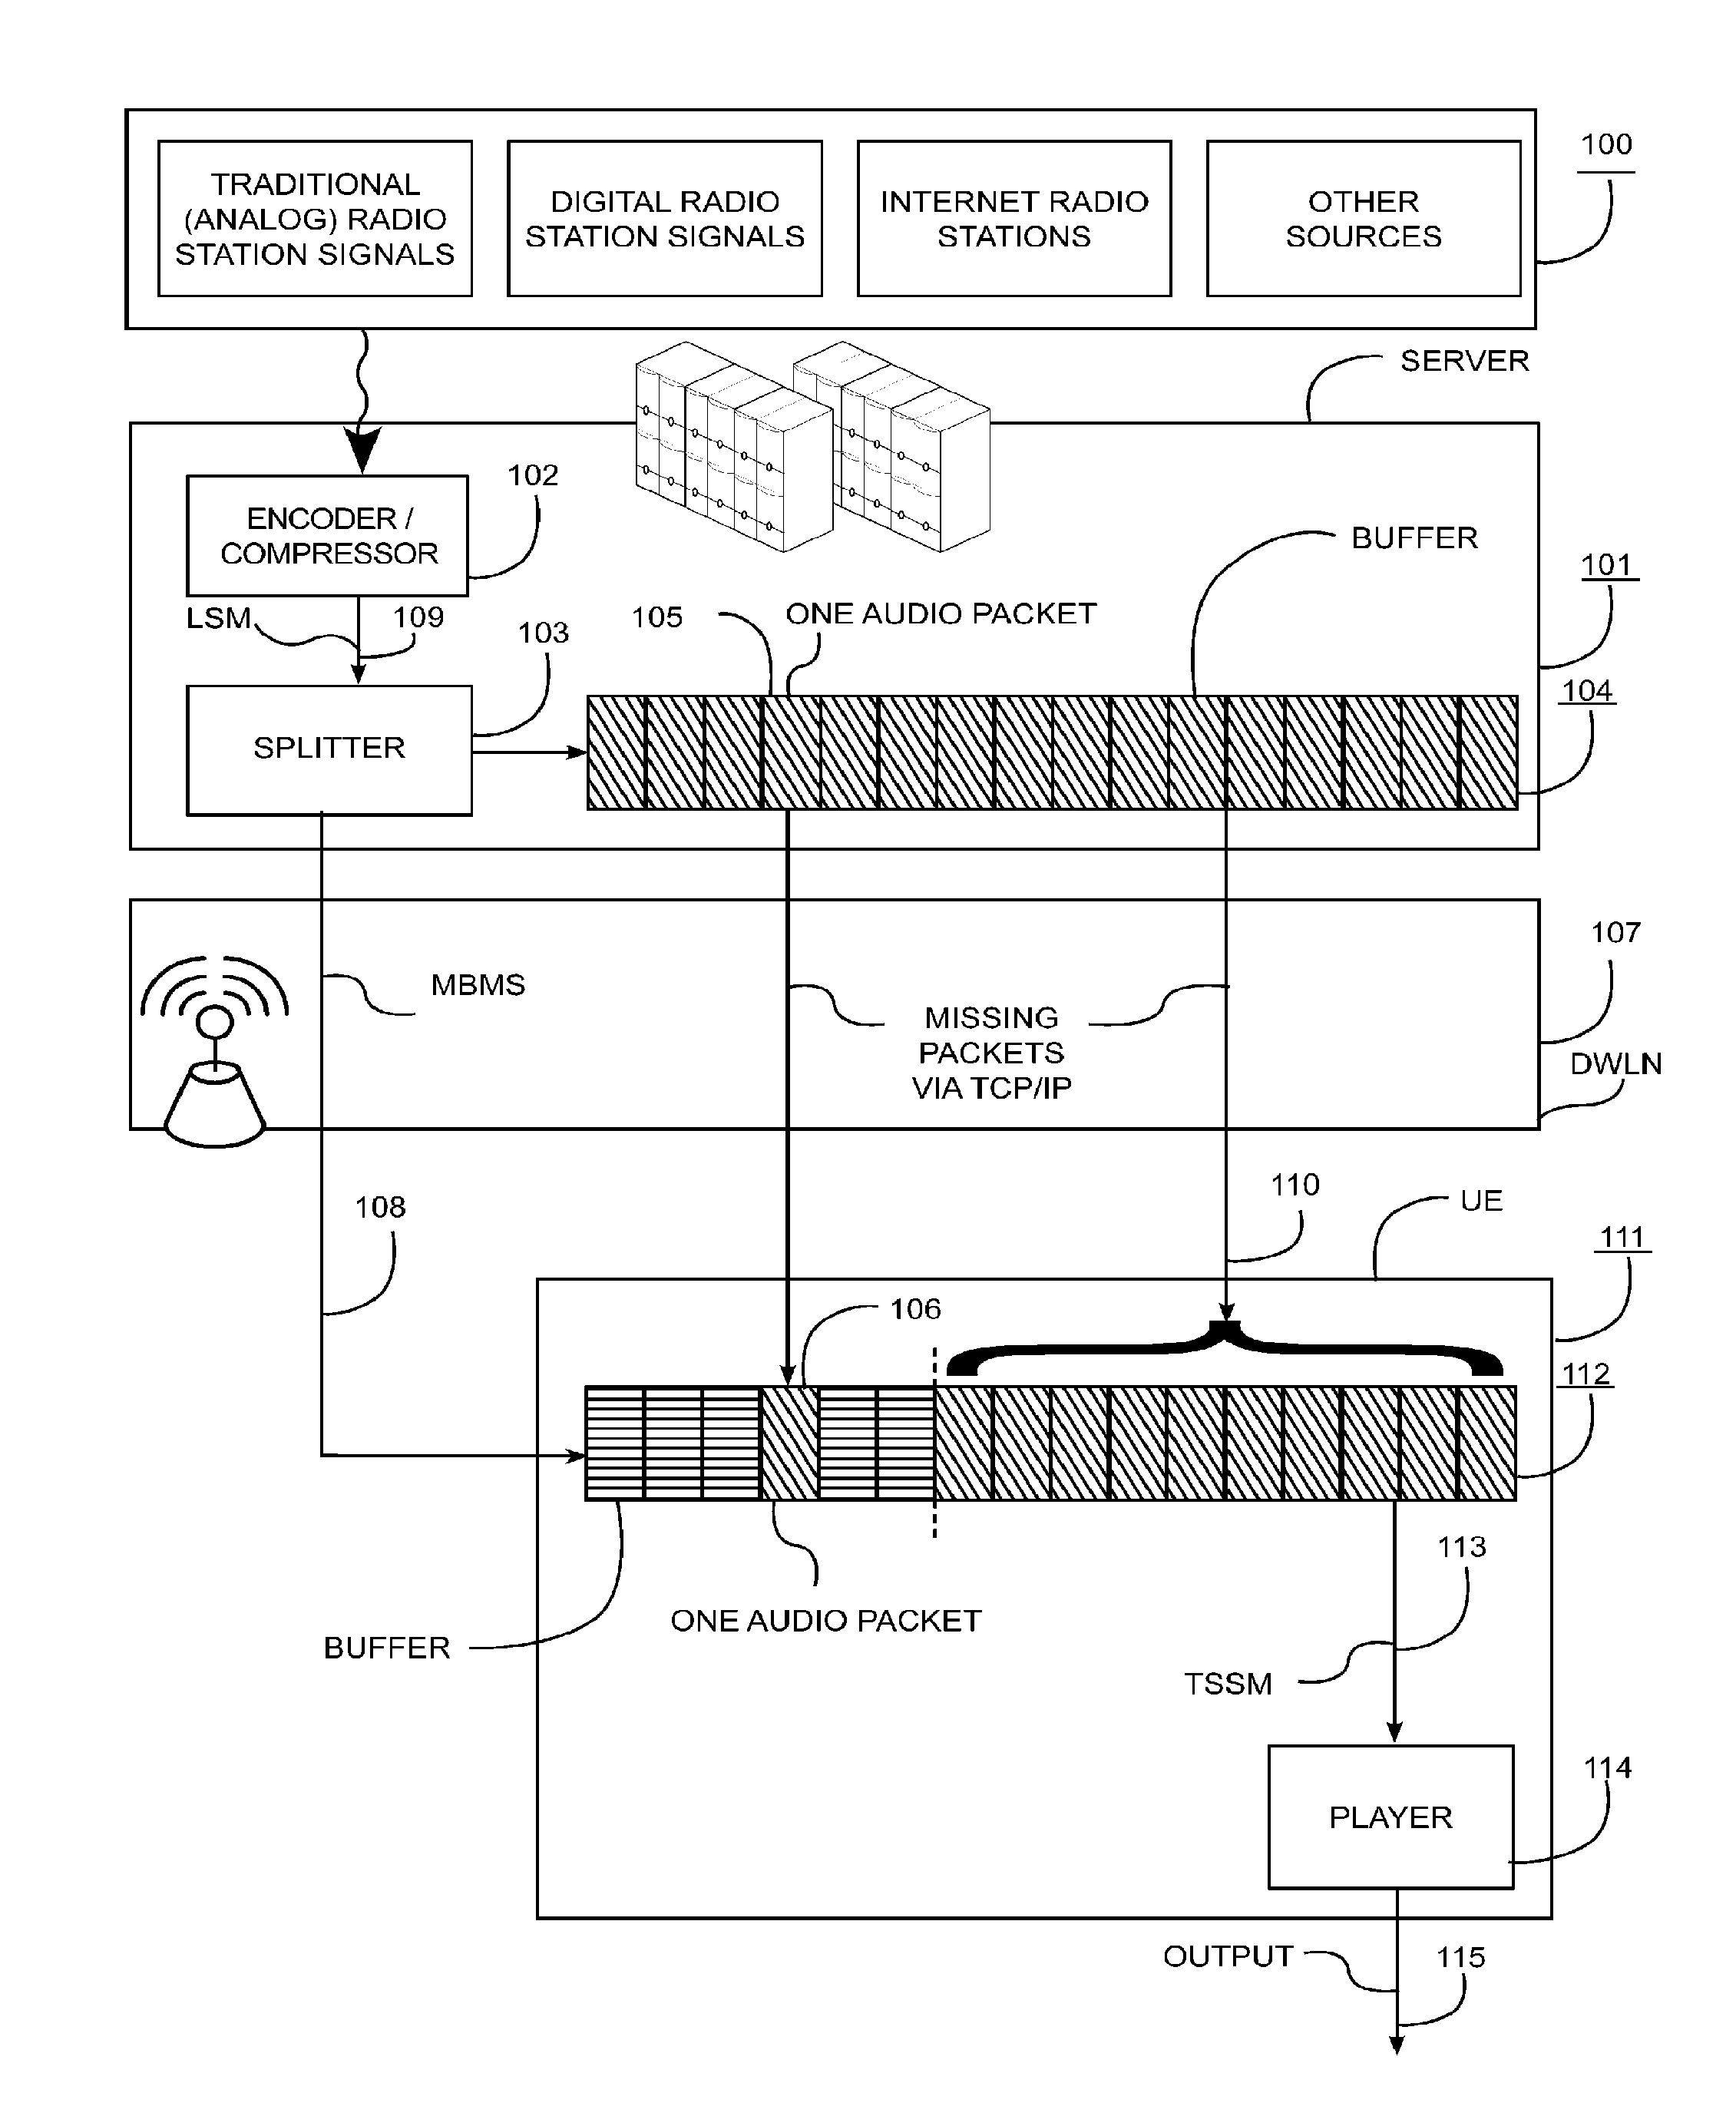 Systems and methods for transmission of uninterrupted radio, television programs and additional data services through wireless networks